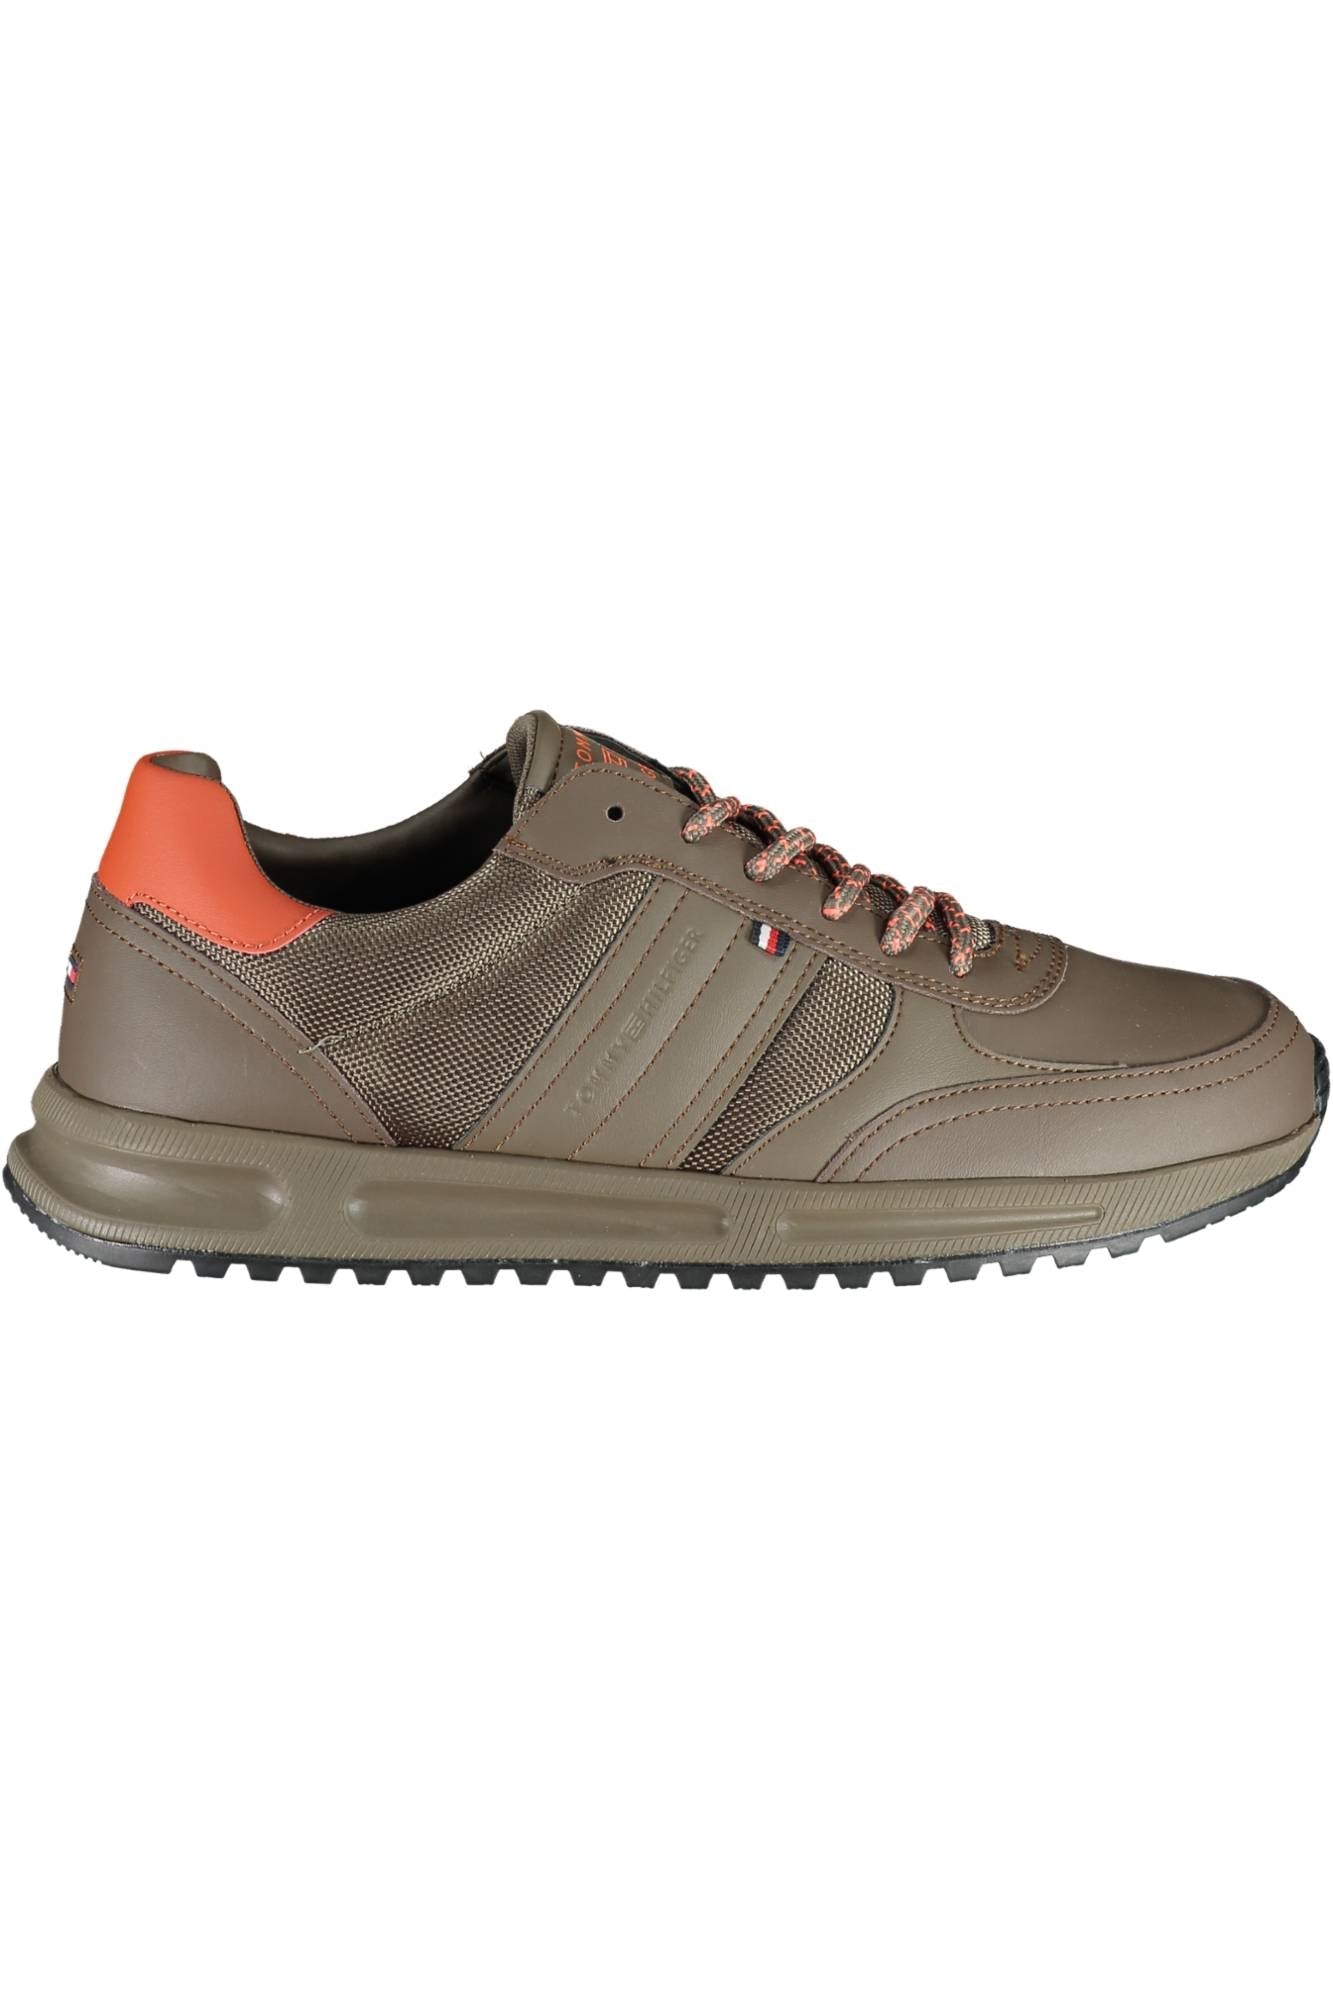 Tommy Hilfiger Brown Synthetic Sneaker - Fizigo